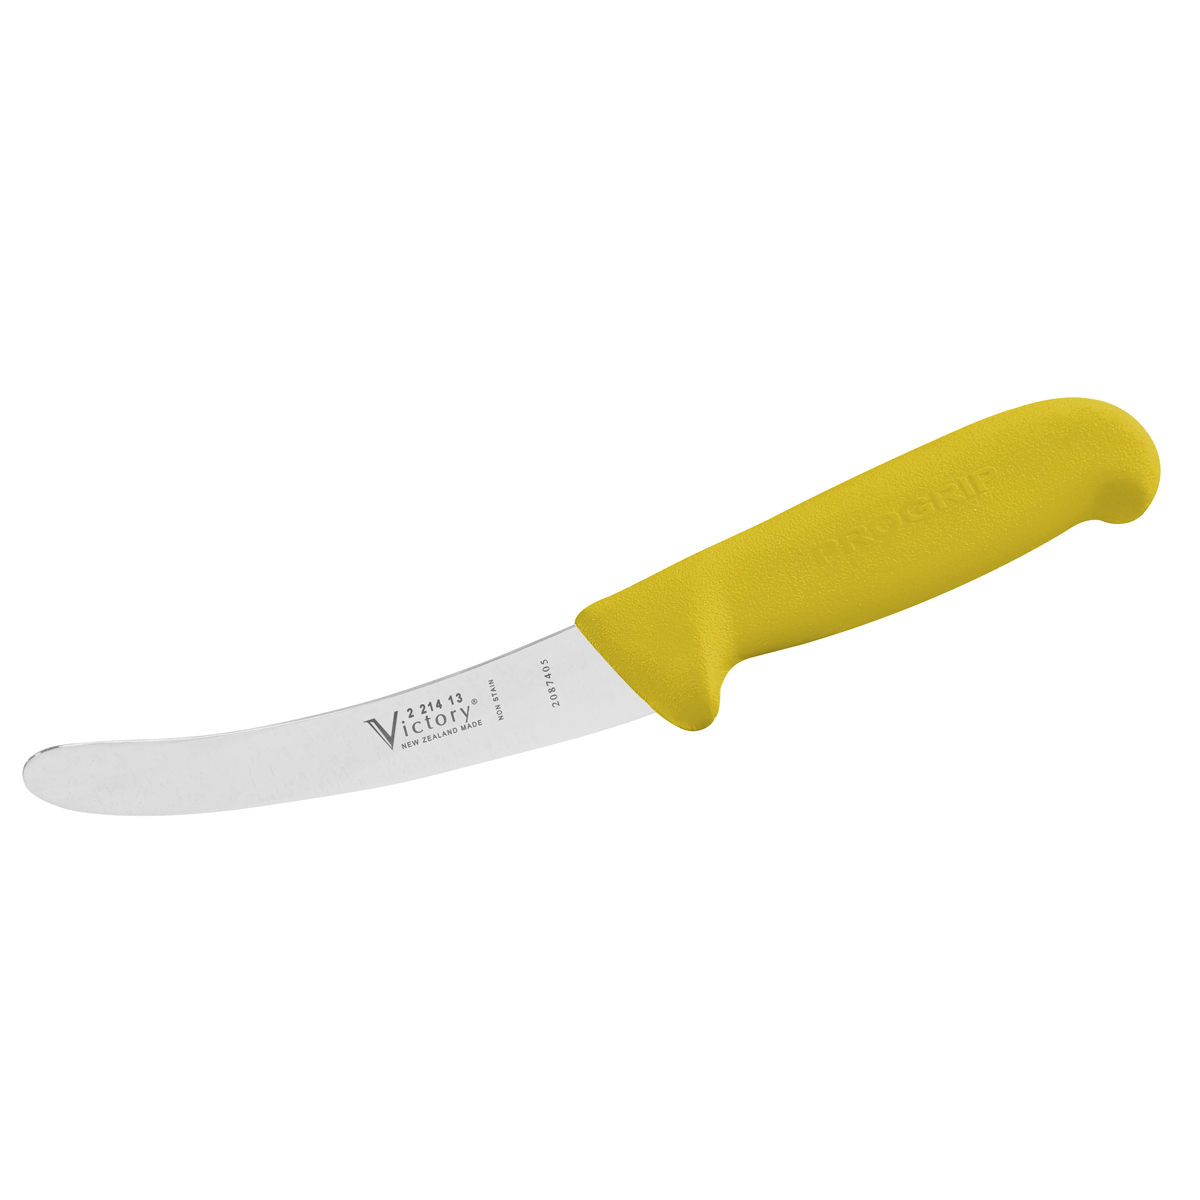 Victory Blunt Dough Knife, 13cm (5) - Yellow